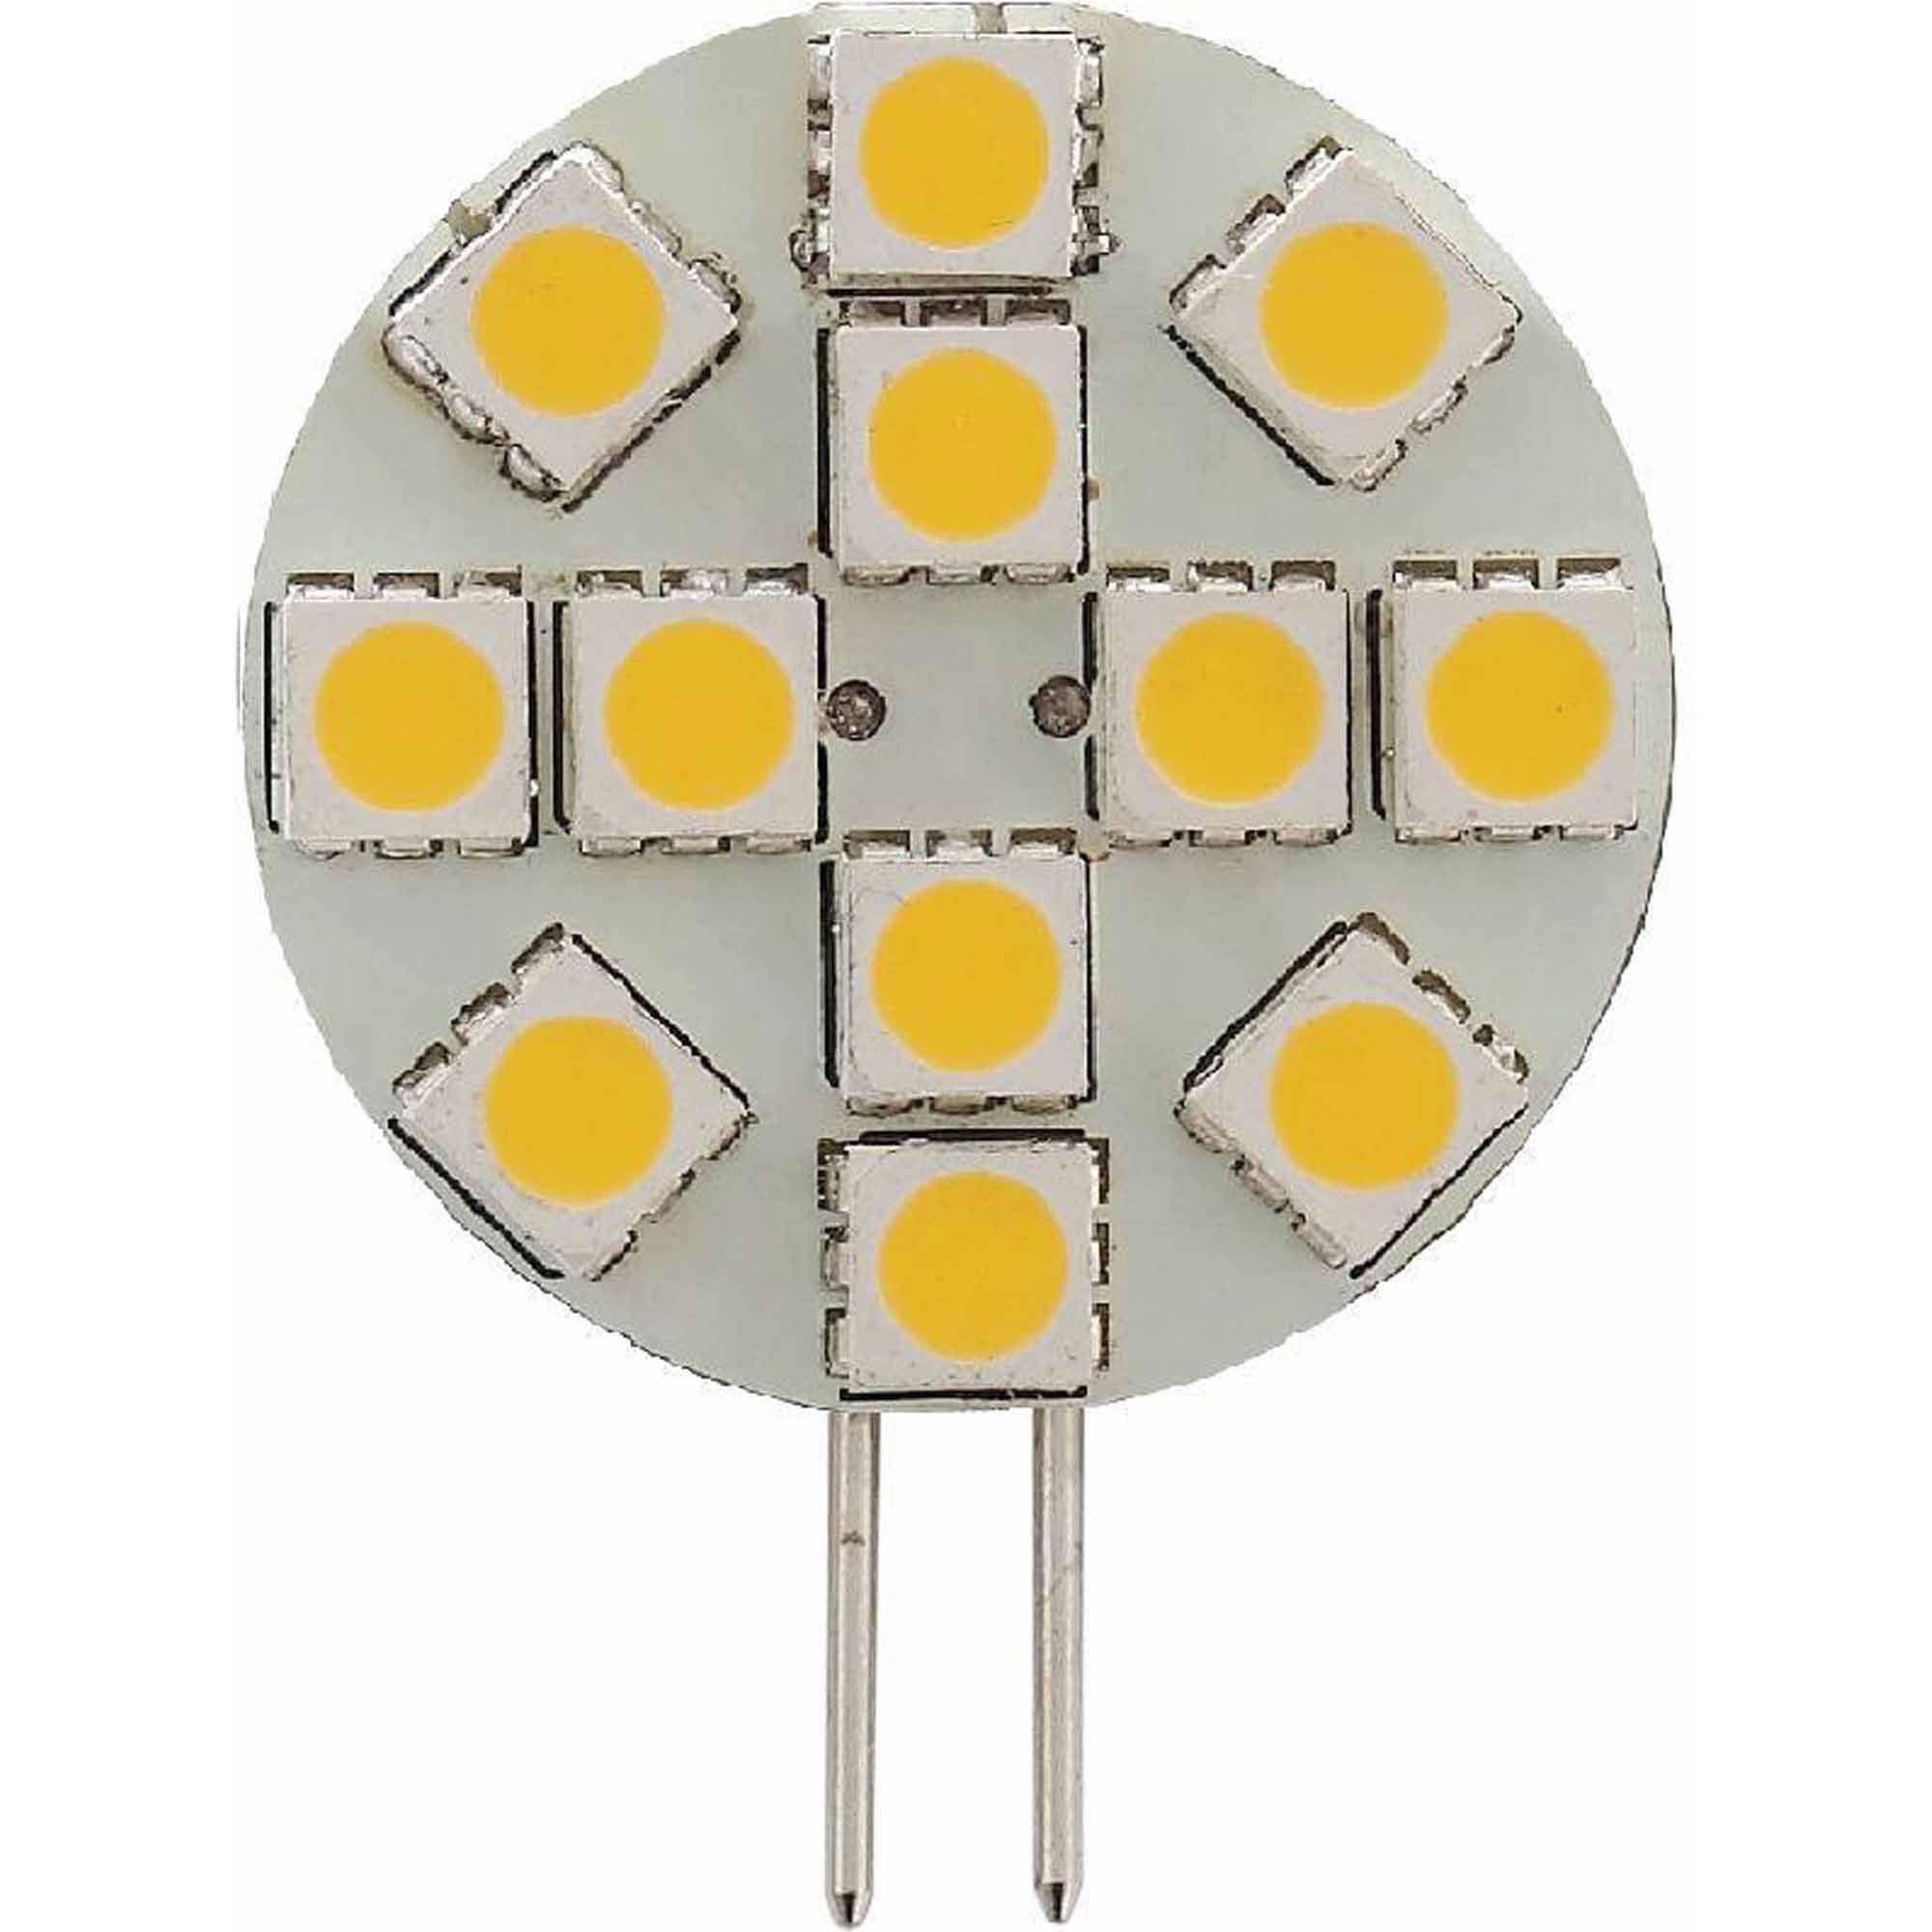 Green LongLife 5050186 LED Replacement Light Bulb G4 base with L shape pins 150 Lumens 12v or 24v Warm White 